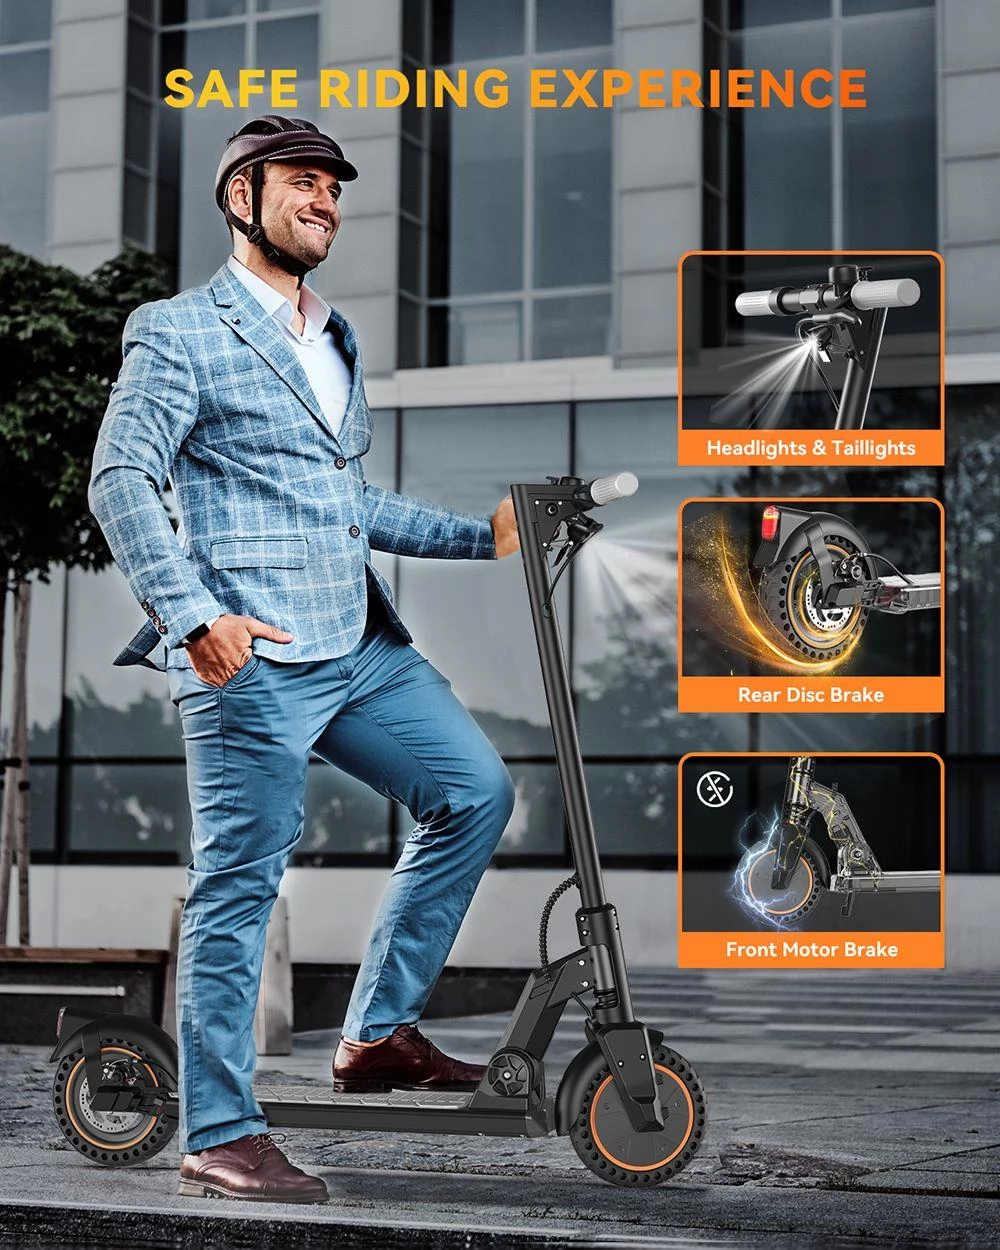 5TH WHEEL M2 8.5 Honeycomb Tires Foldable Electric Scooter - 350W Motor & 36V/7.5Ah Battery